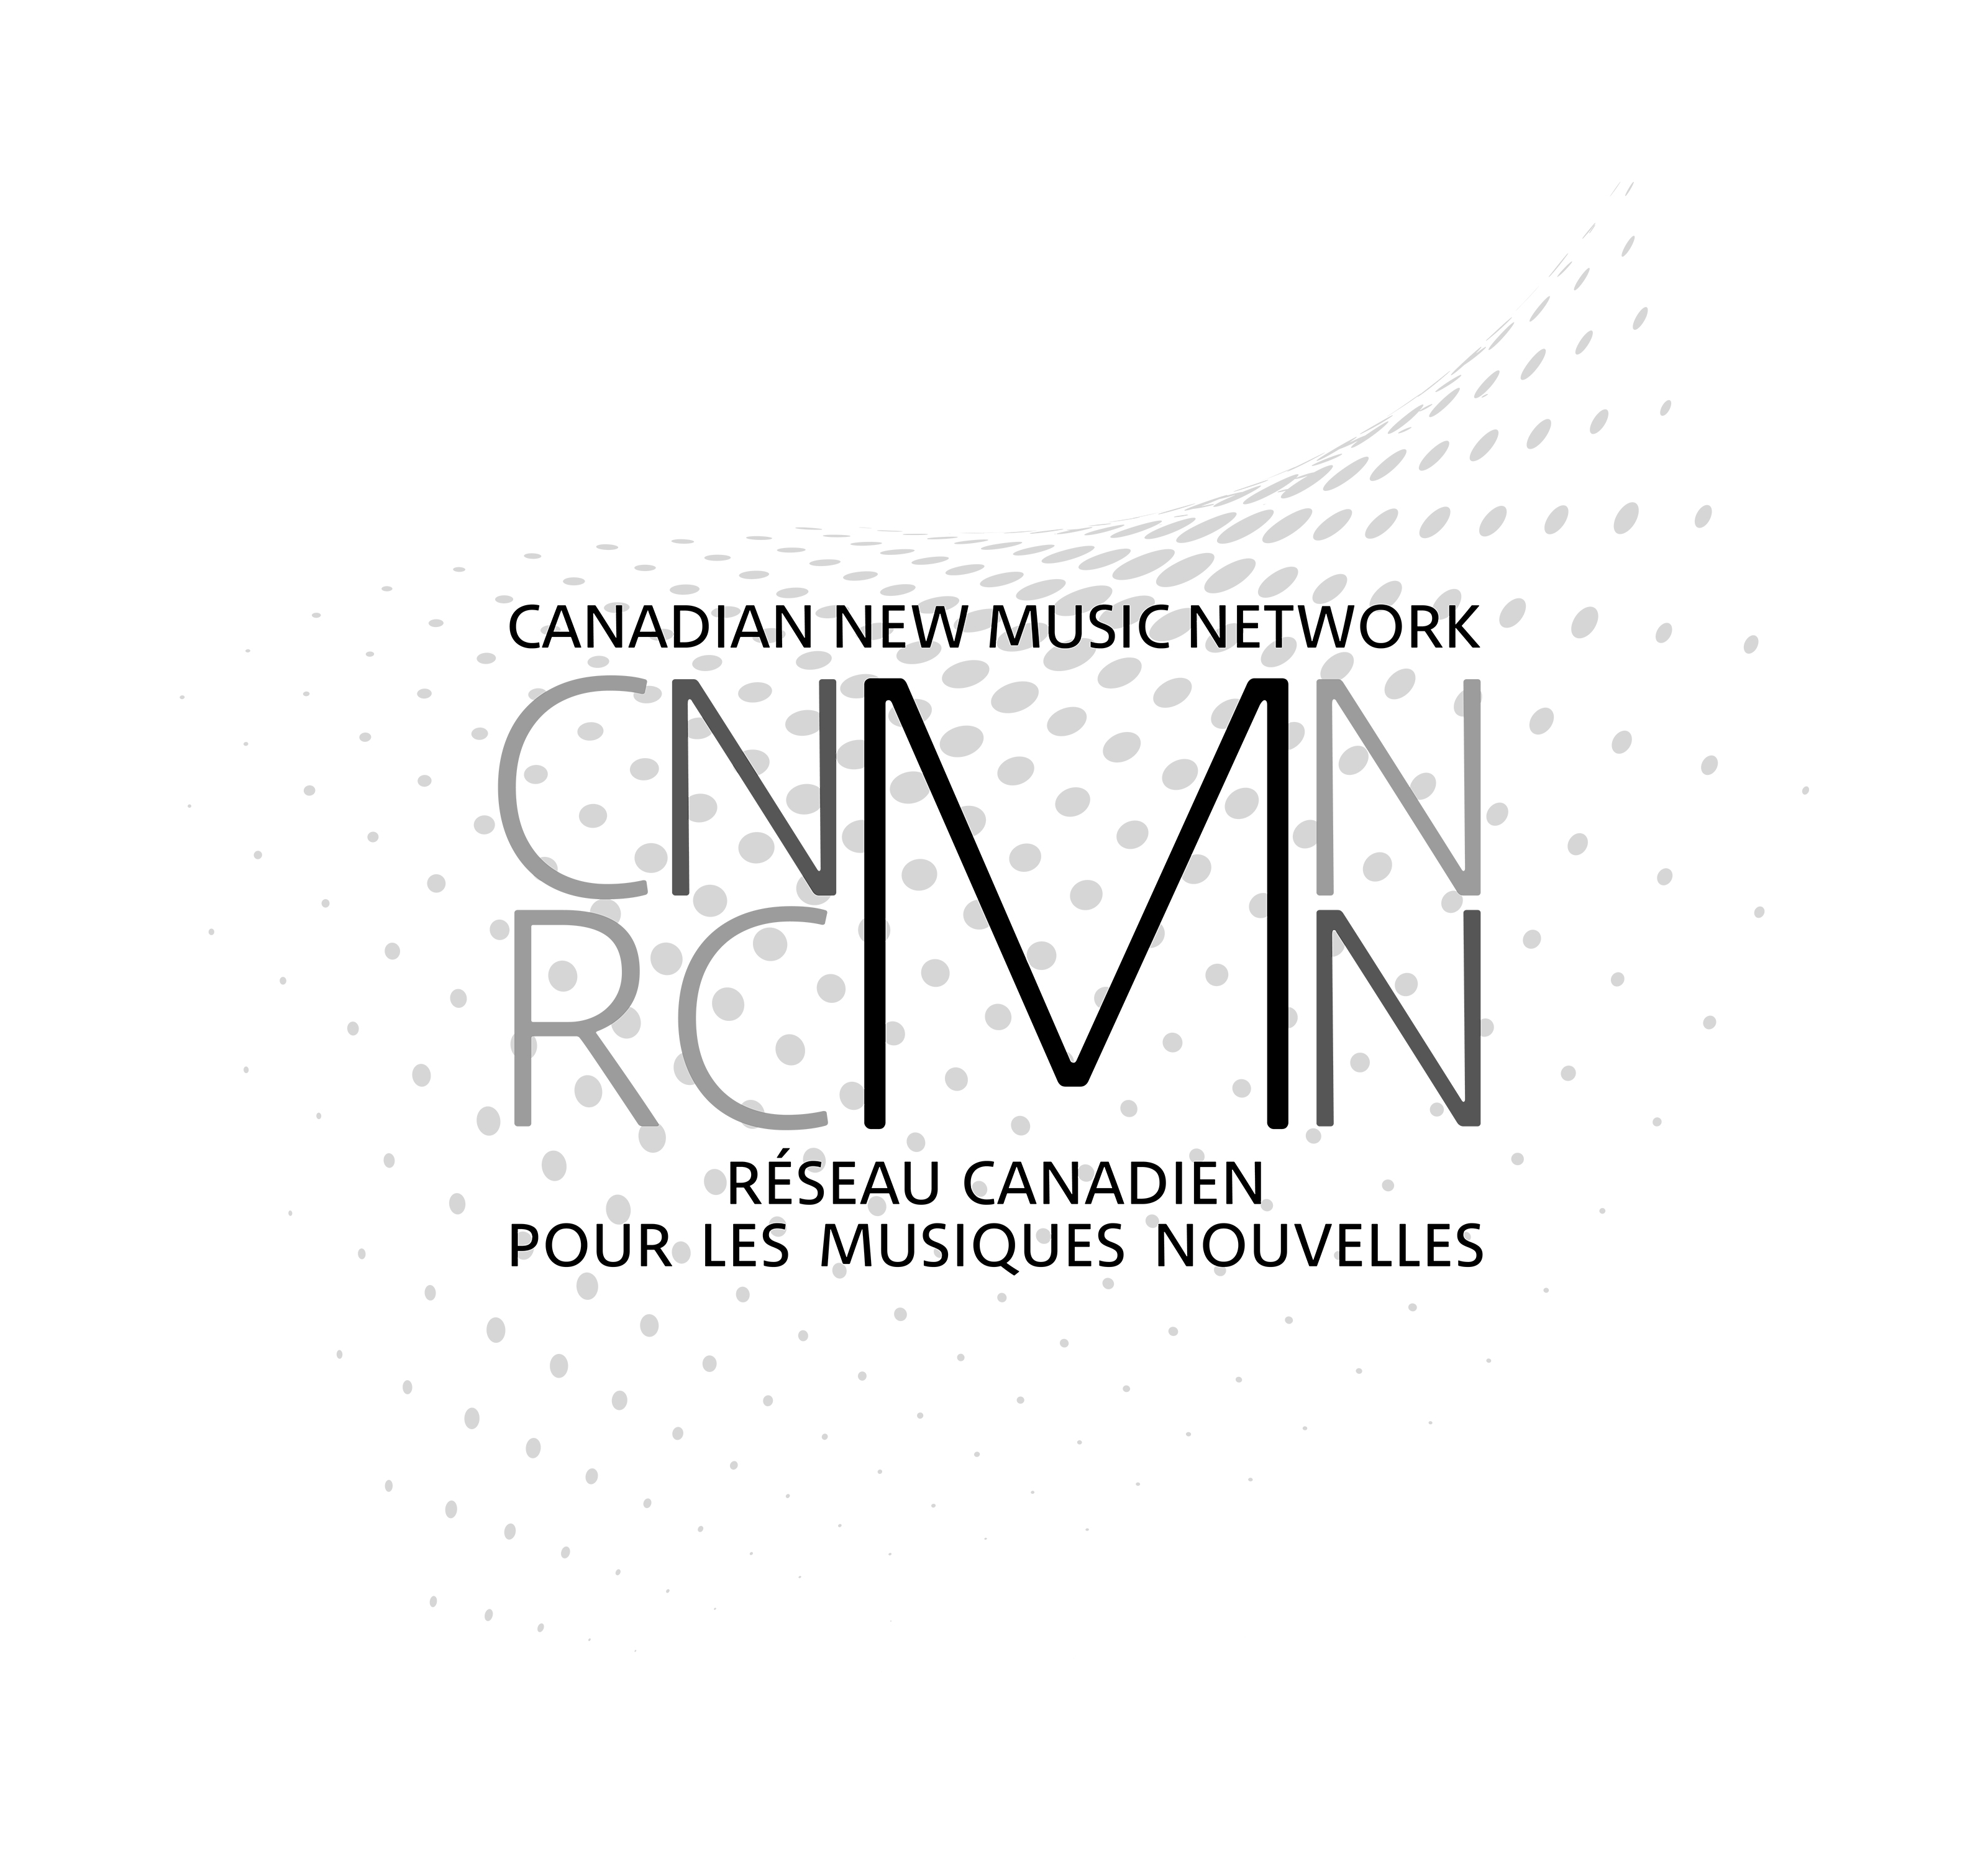 Logo of the Canadian Ntework for New Music